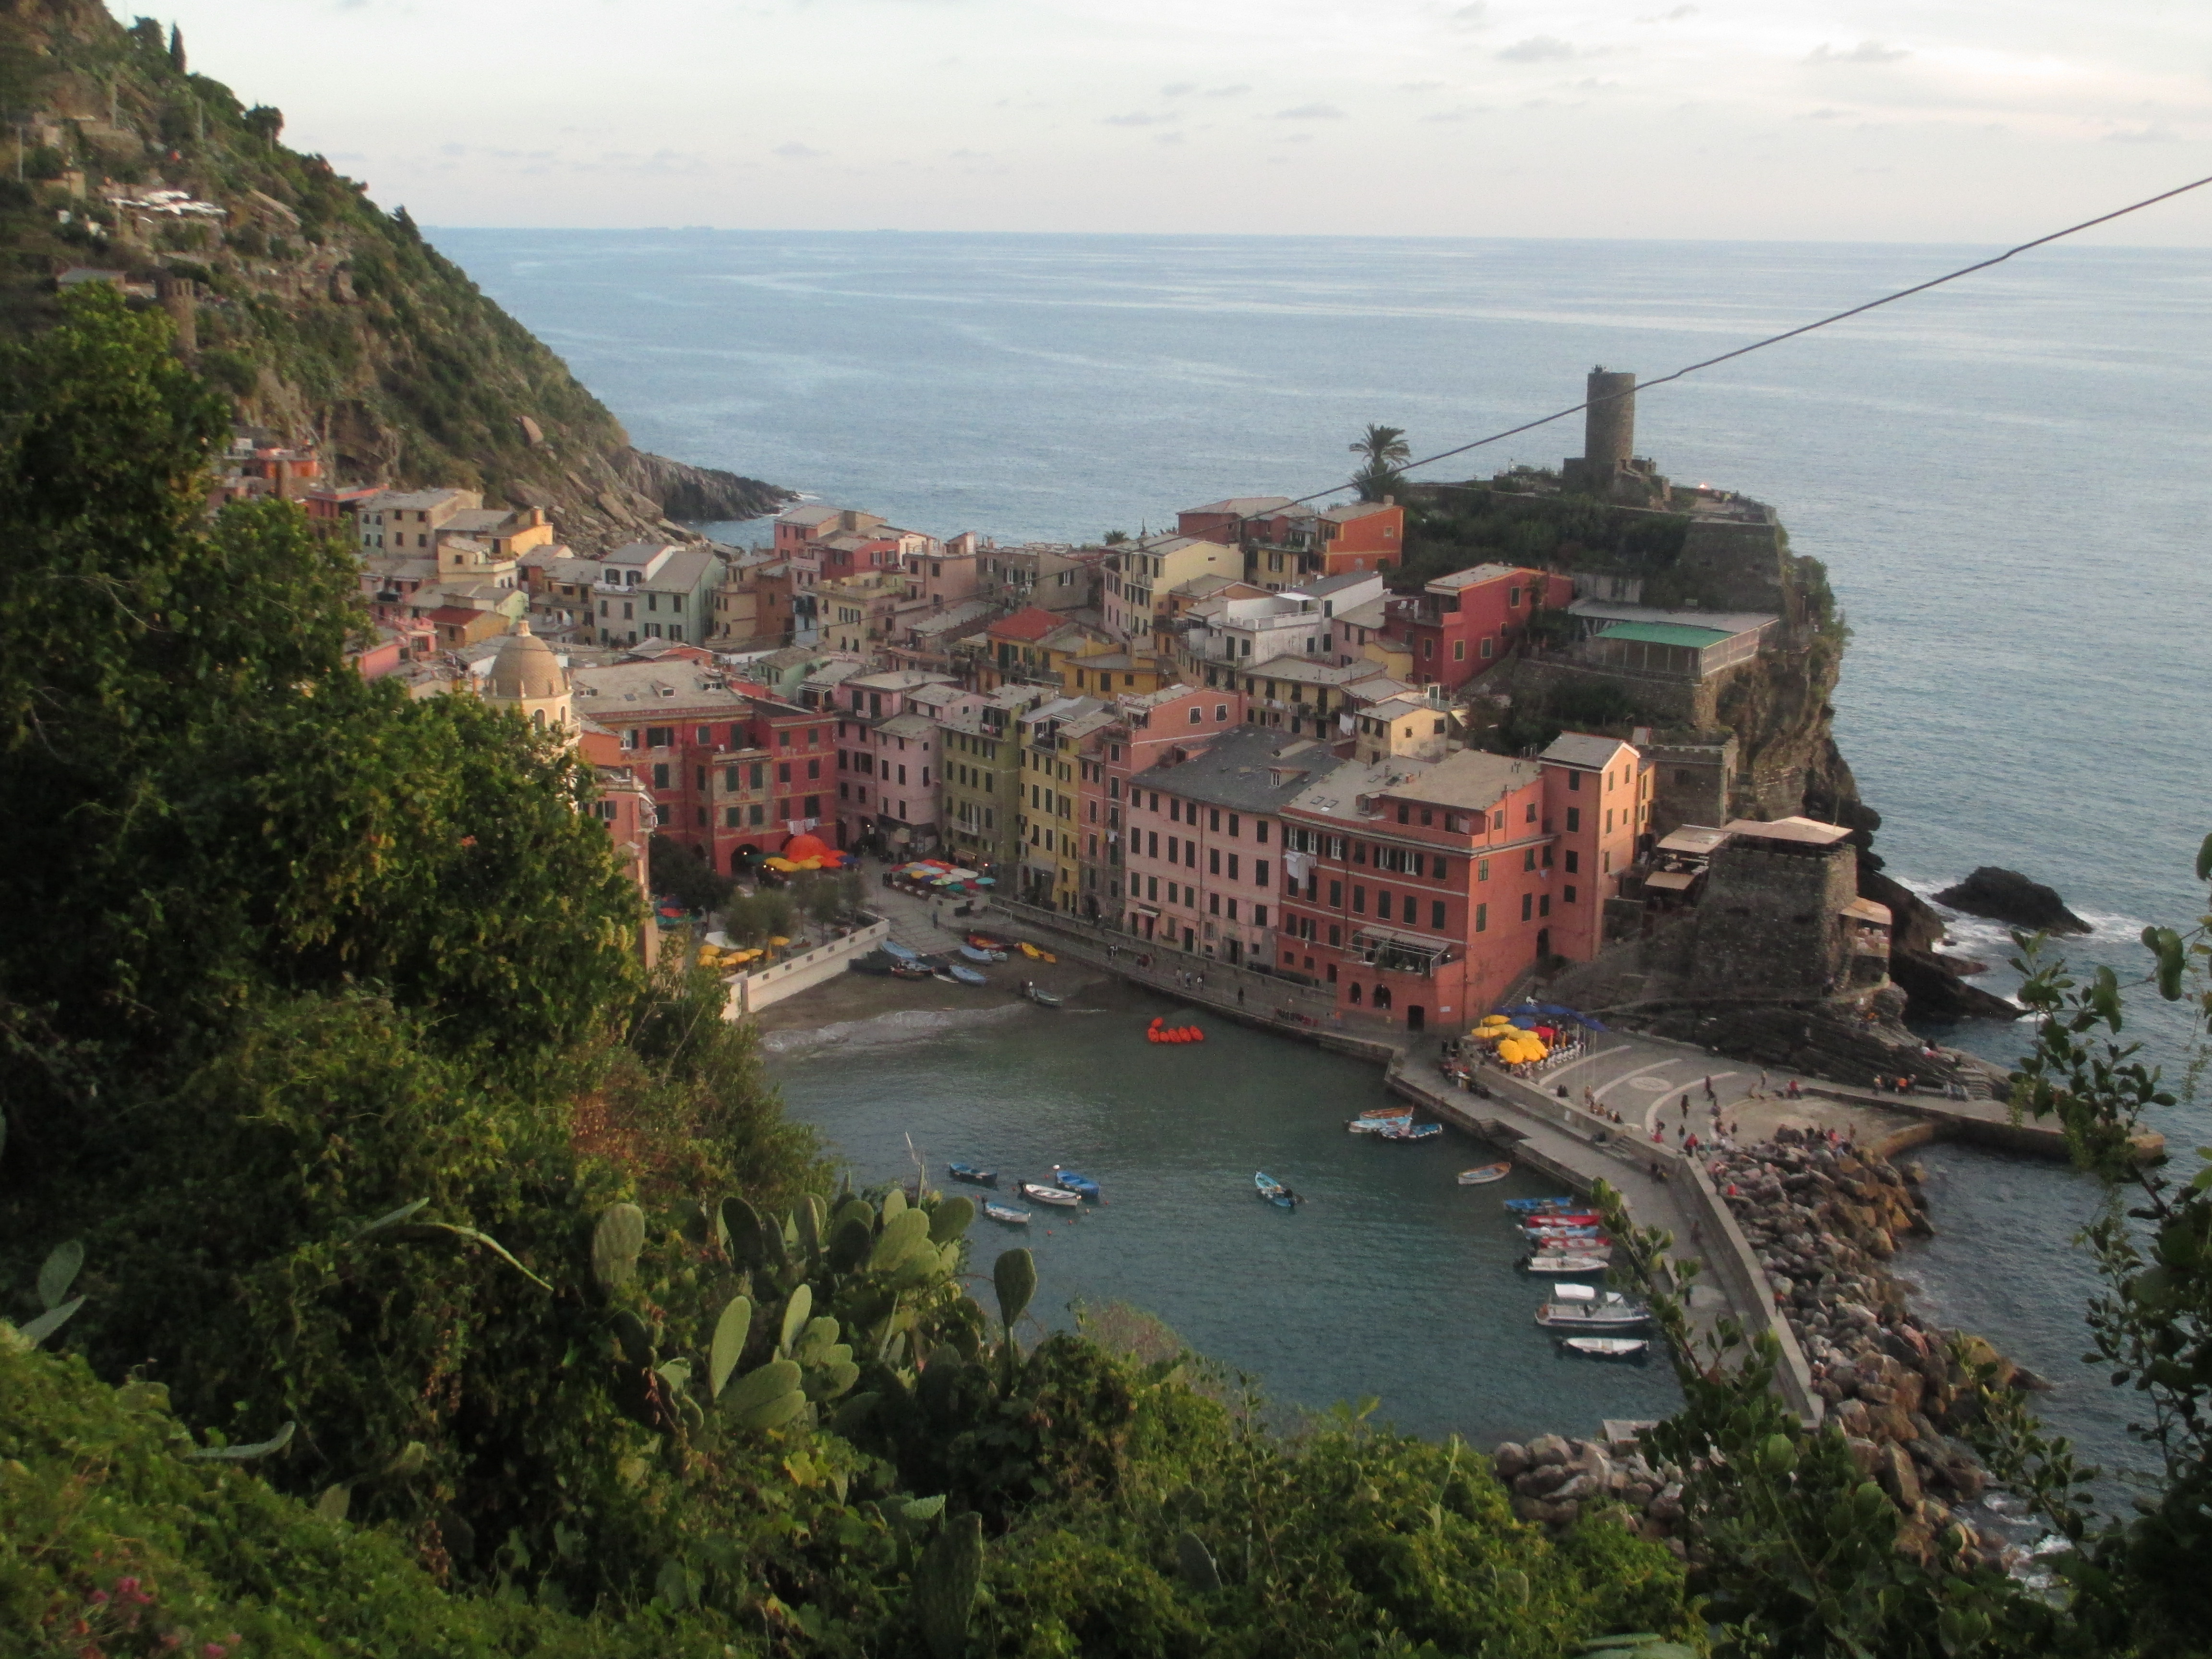 A view of Vernazza, Italy from the Blue Trail